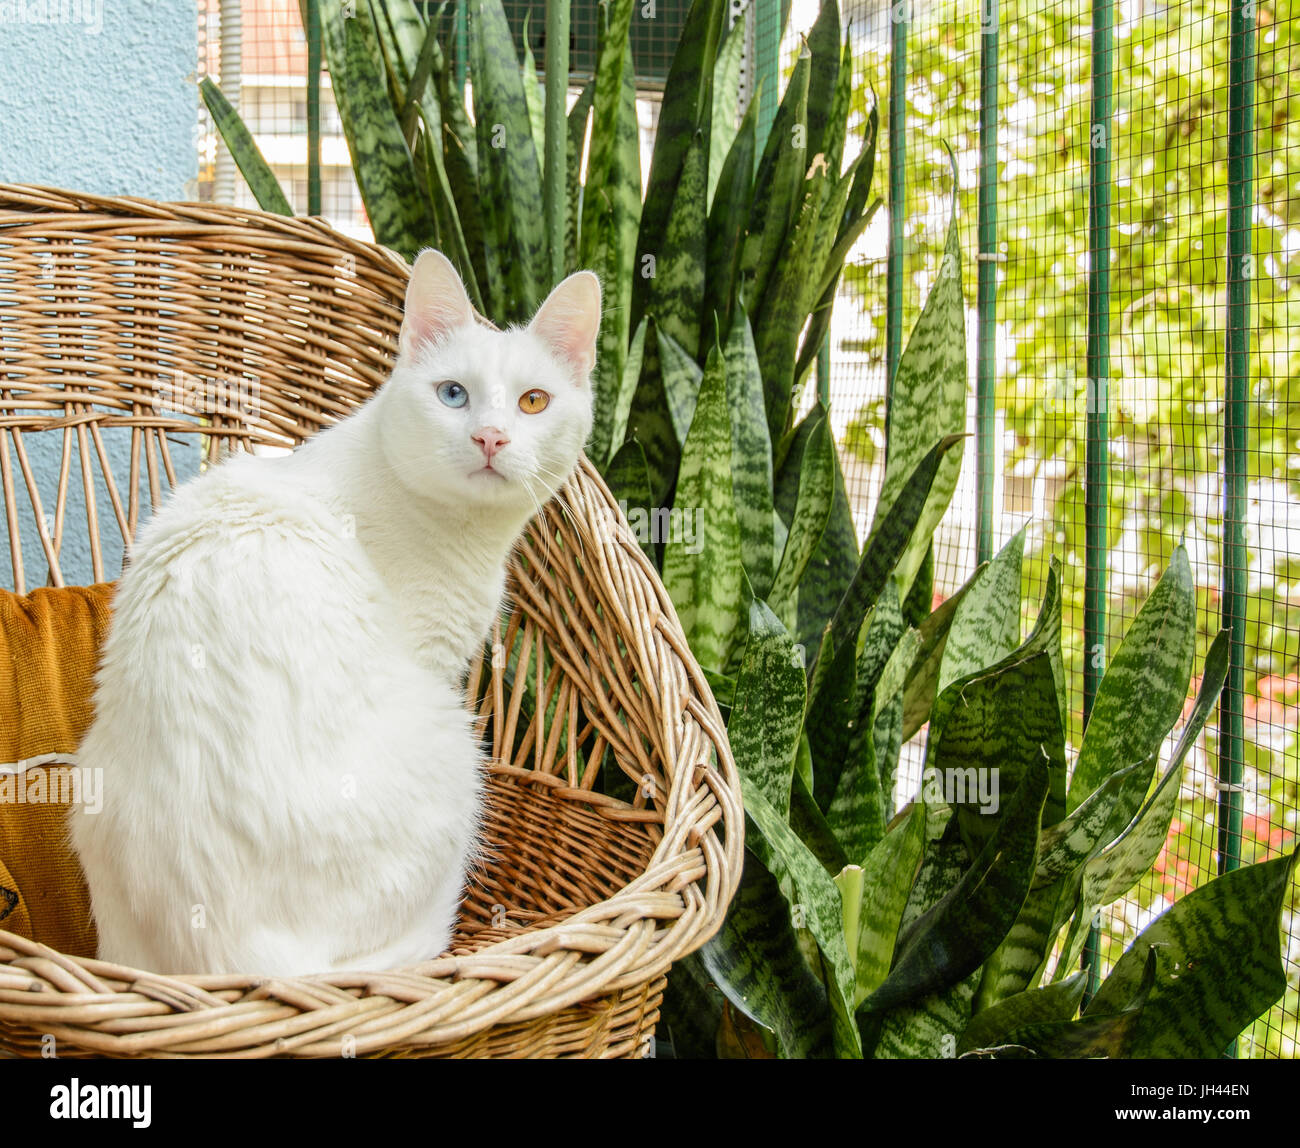 White cat sitting in the wicker chair beside mother-in-law's tongue. Stock Photo